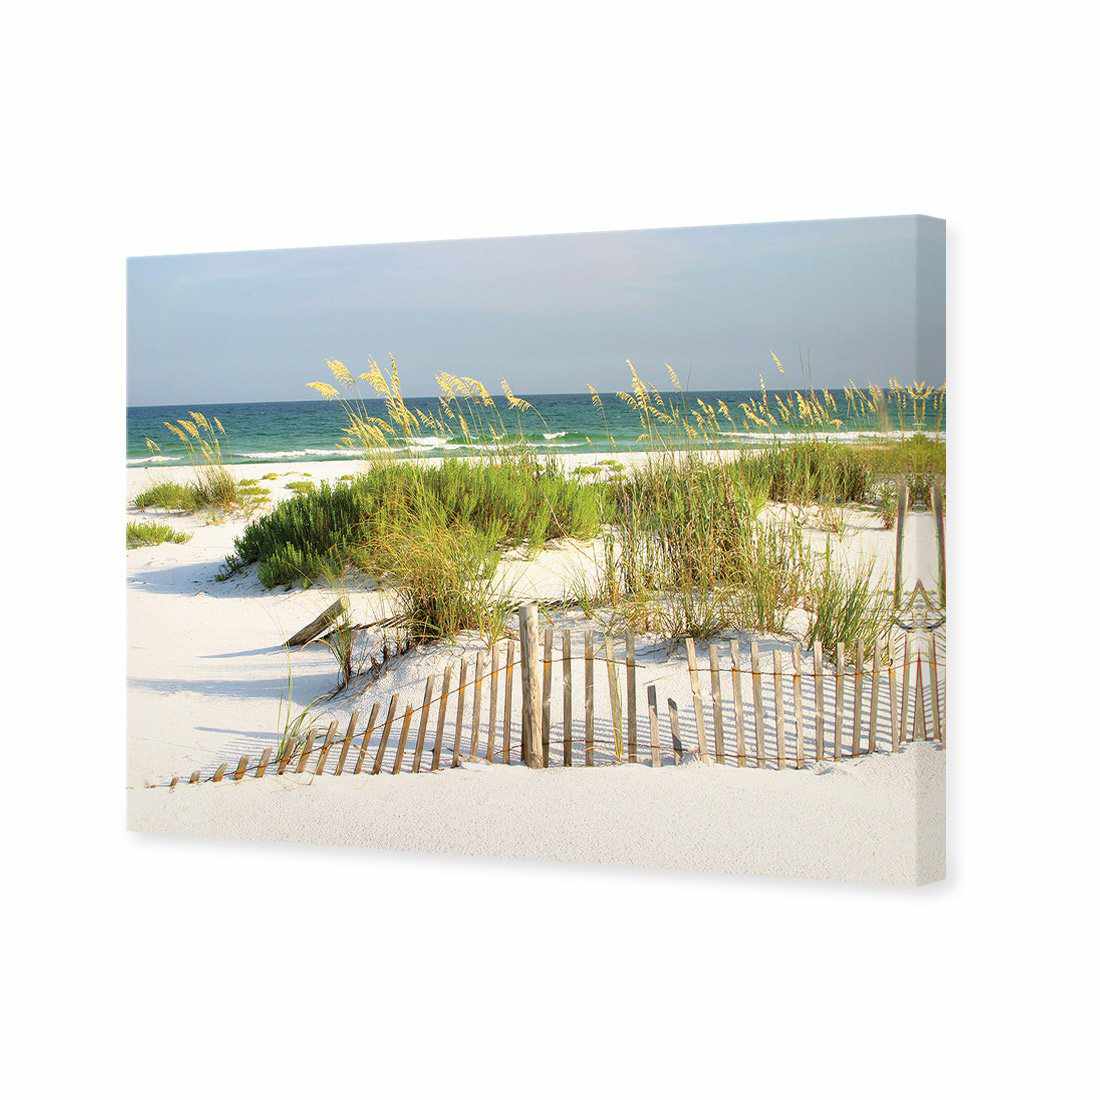 Sand Dune Reflections Canvas Art-Canvas-Wall Art Designs-45x30cm-Canvas - No Frame-Wall Art Designs